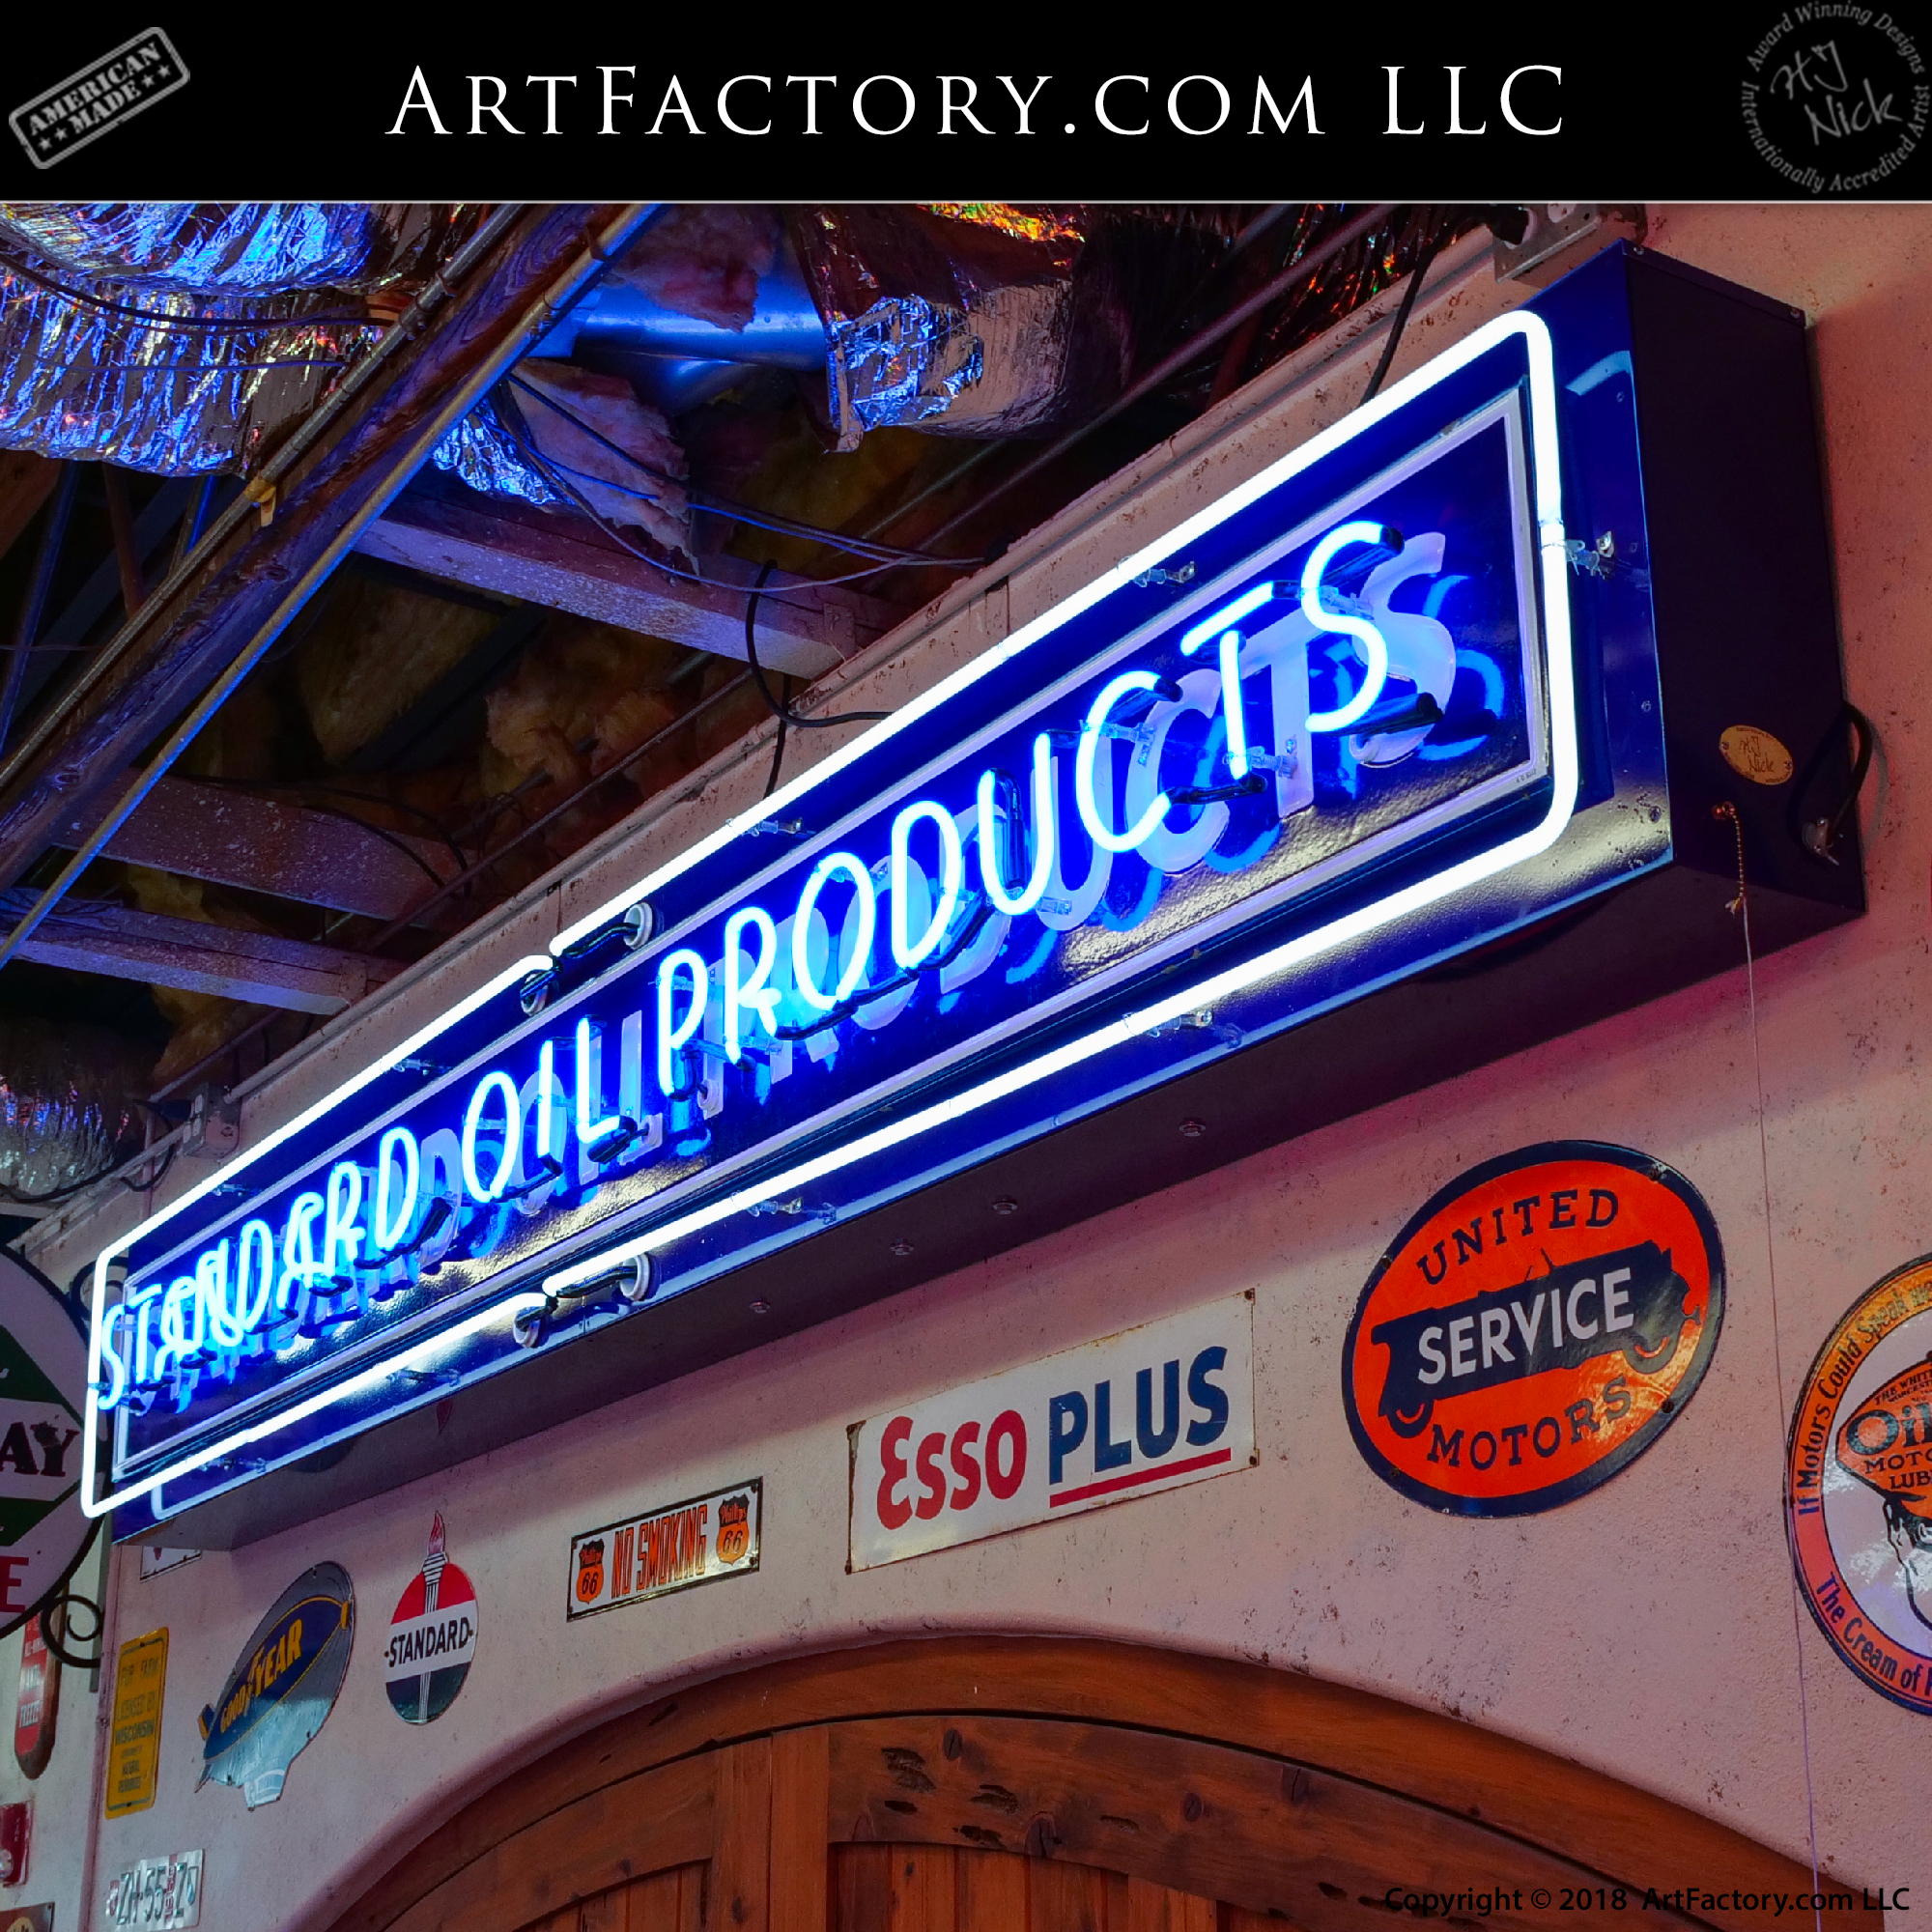 Standard Oil Products Vintage Neon